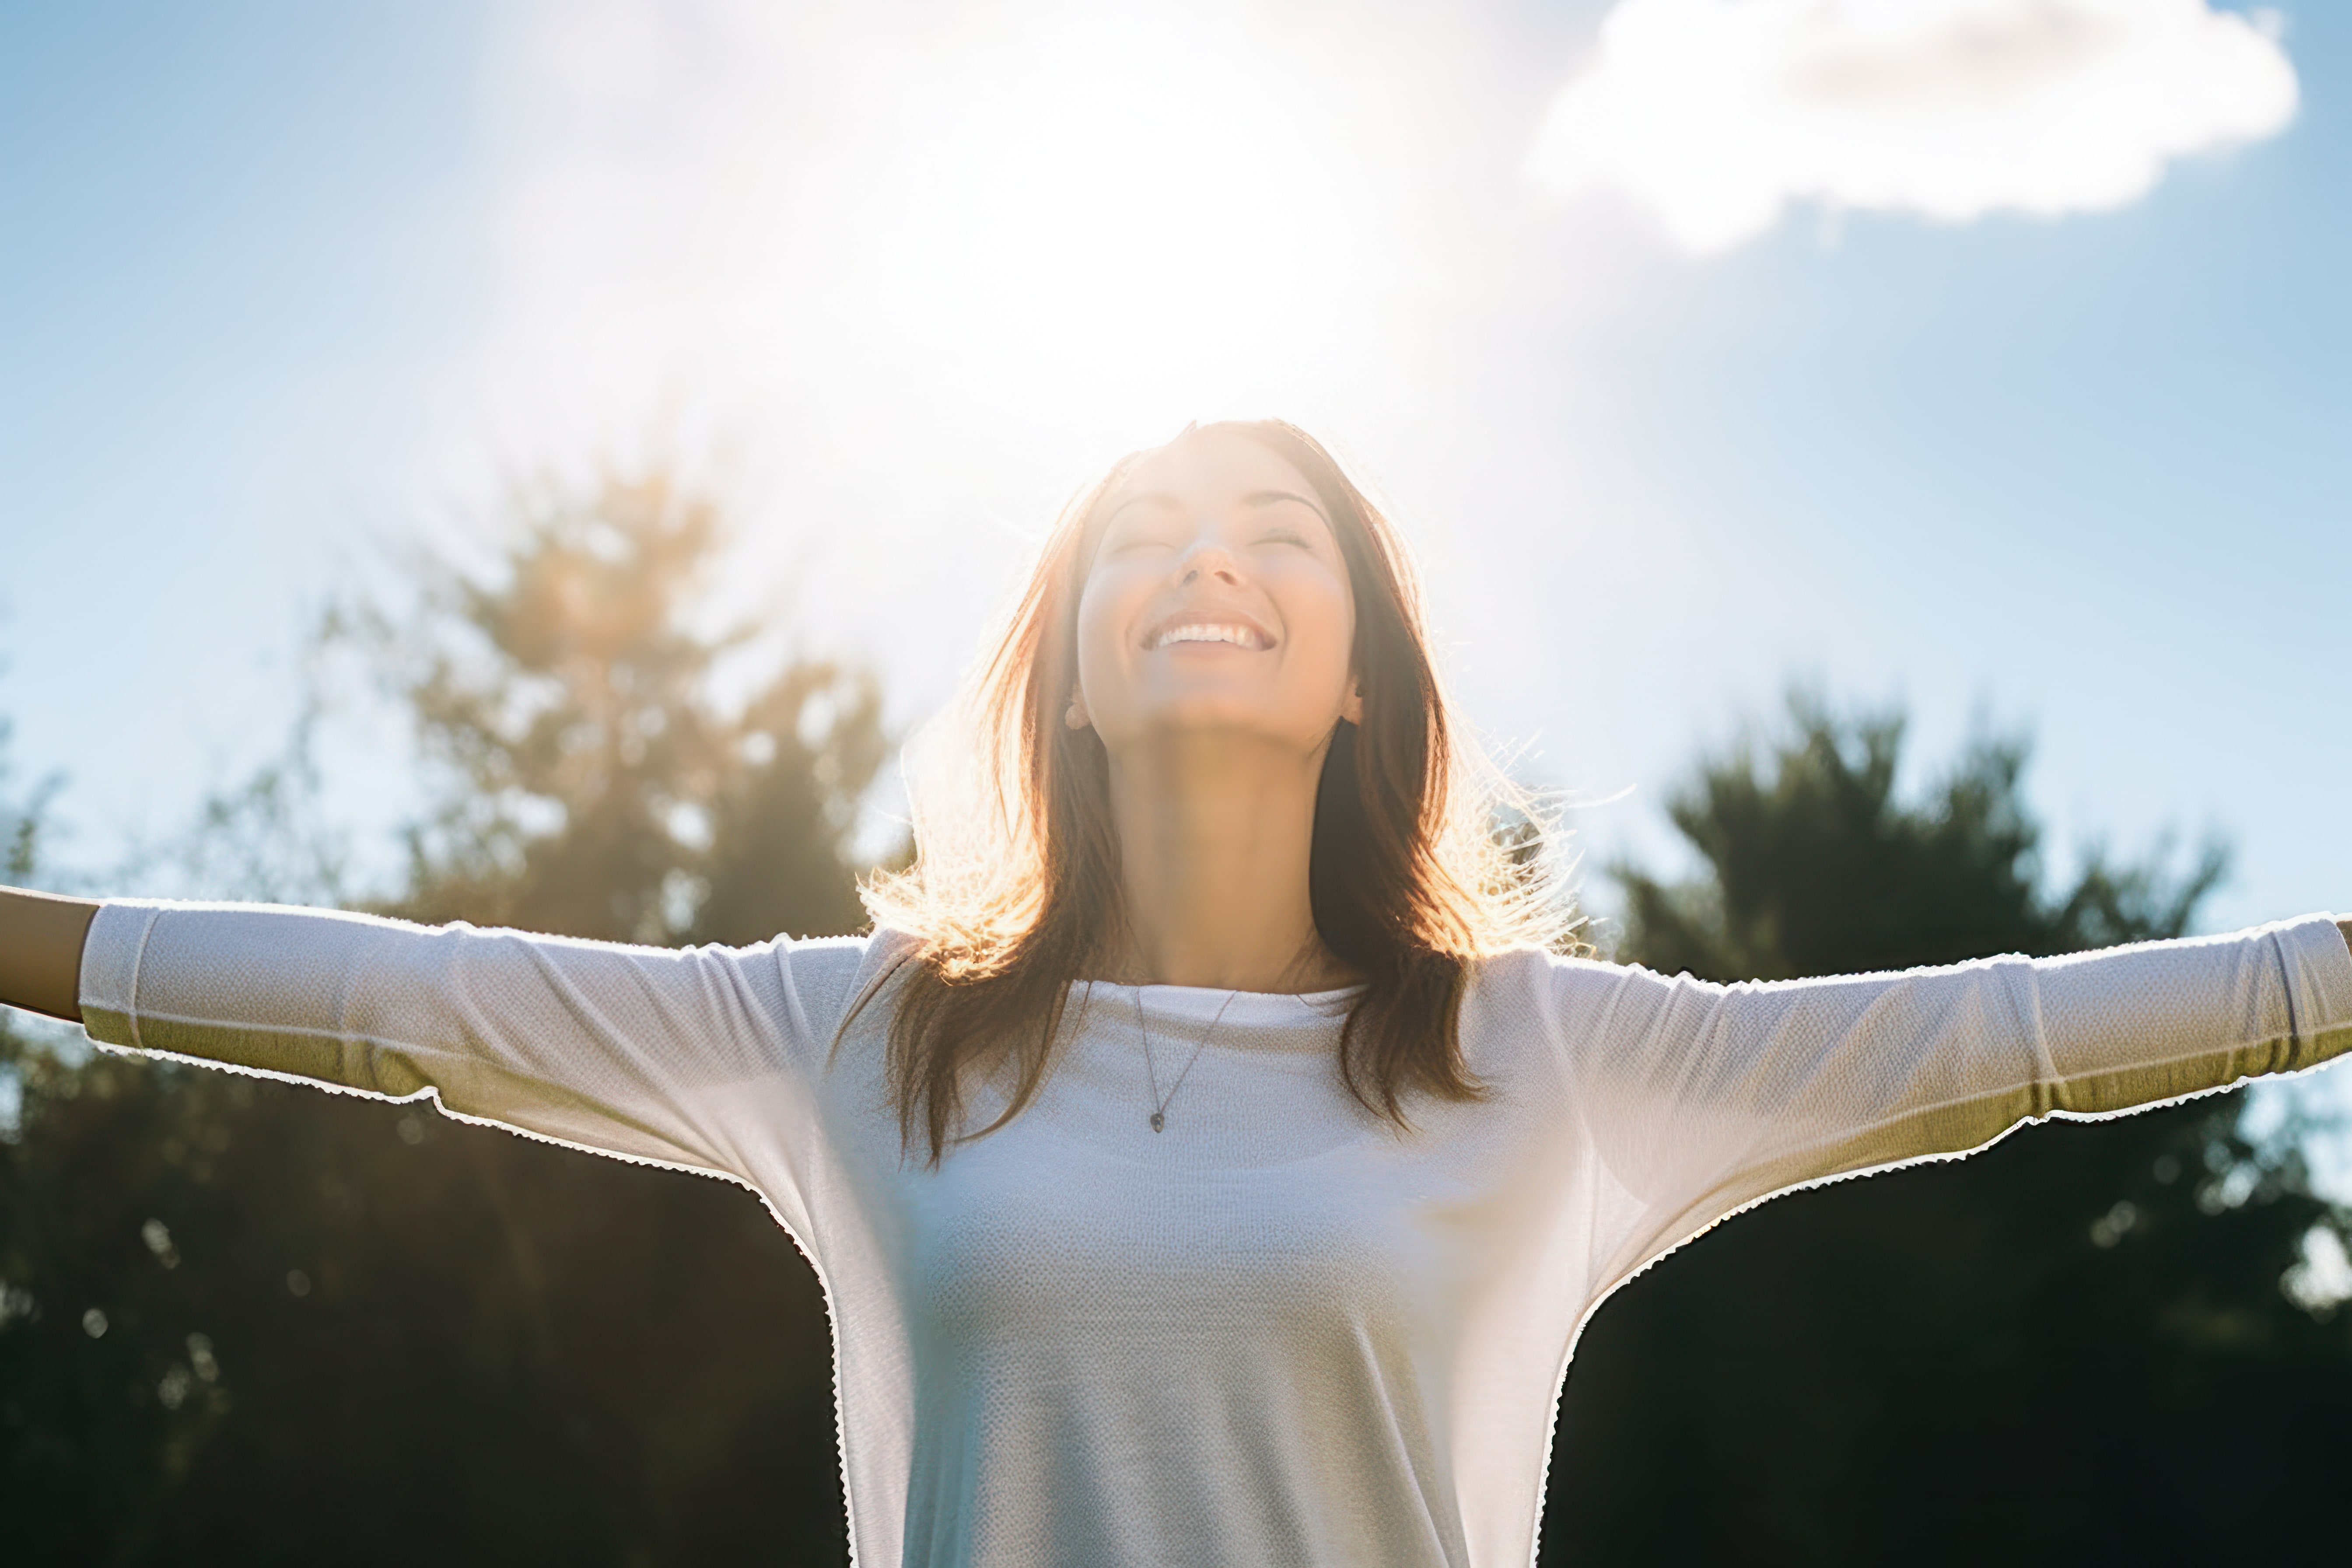 An image of a woman smiling and stretching as the spring sunshine warms her face.